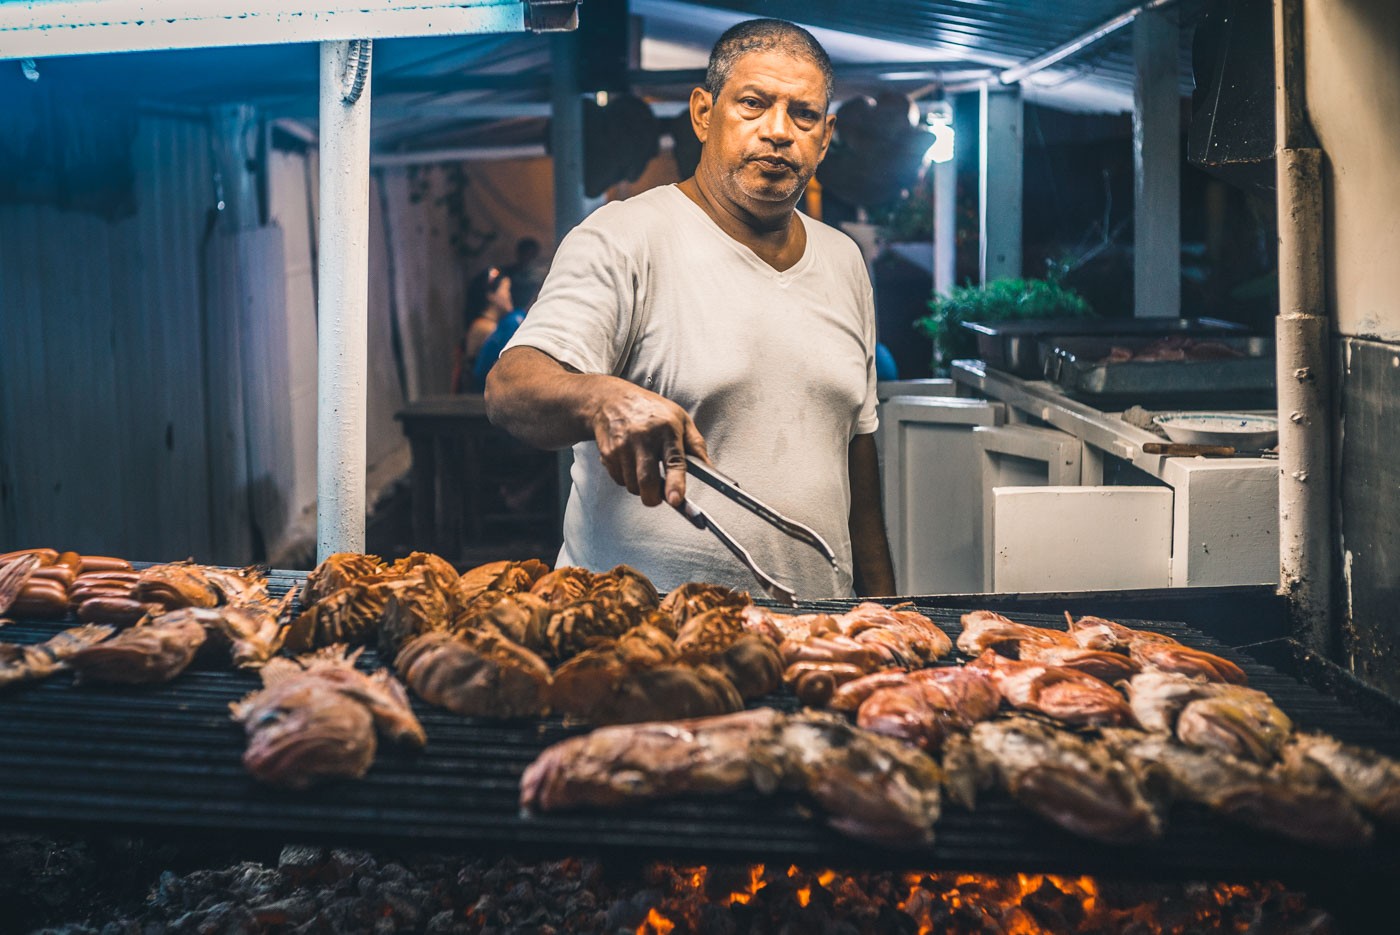 Chef at Parilladas San Jose is cooking up a storm on his back yard grill